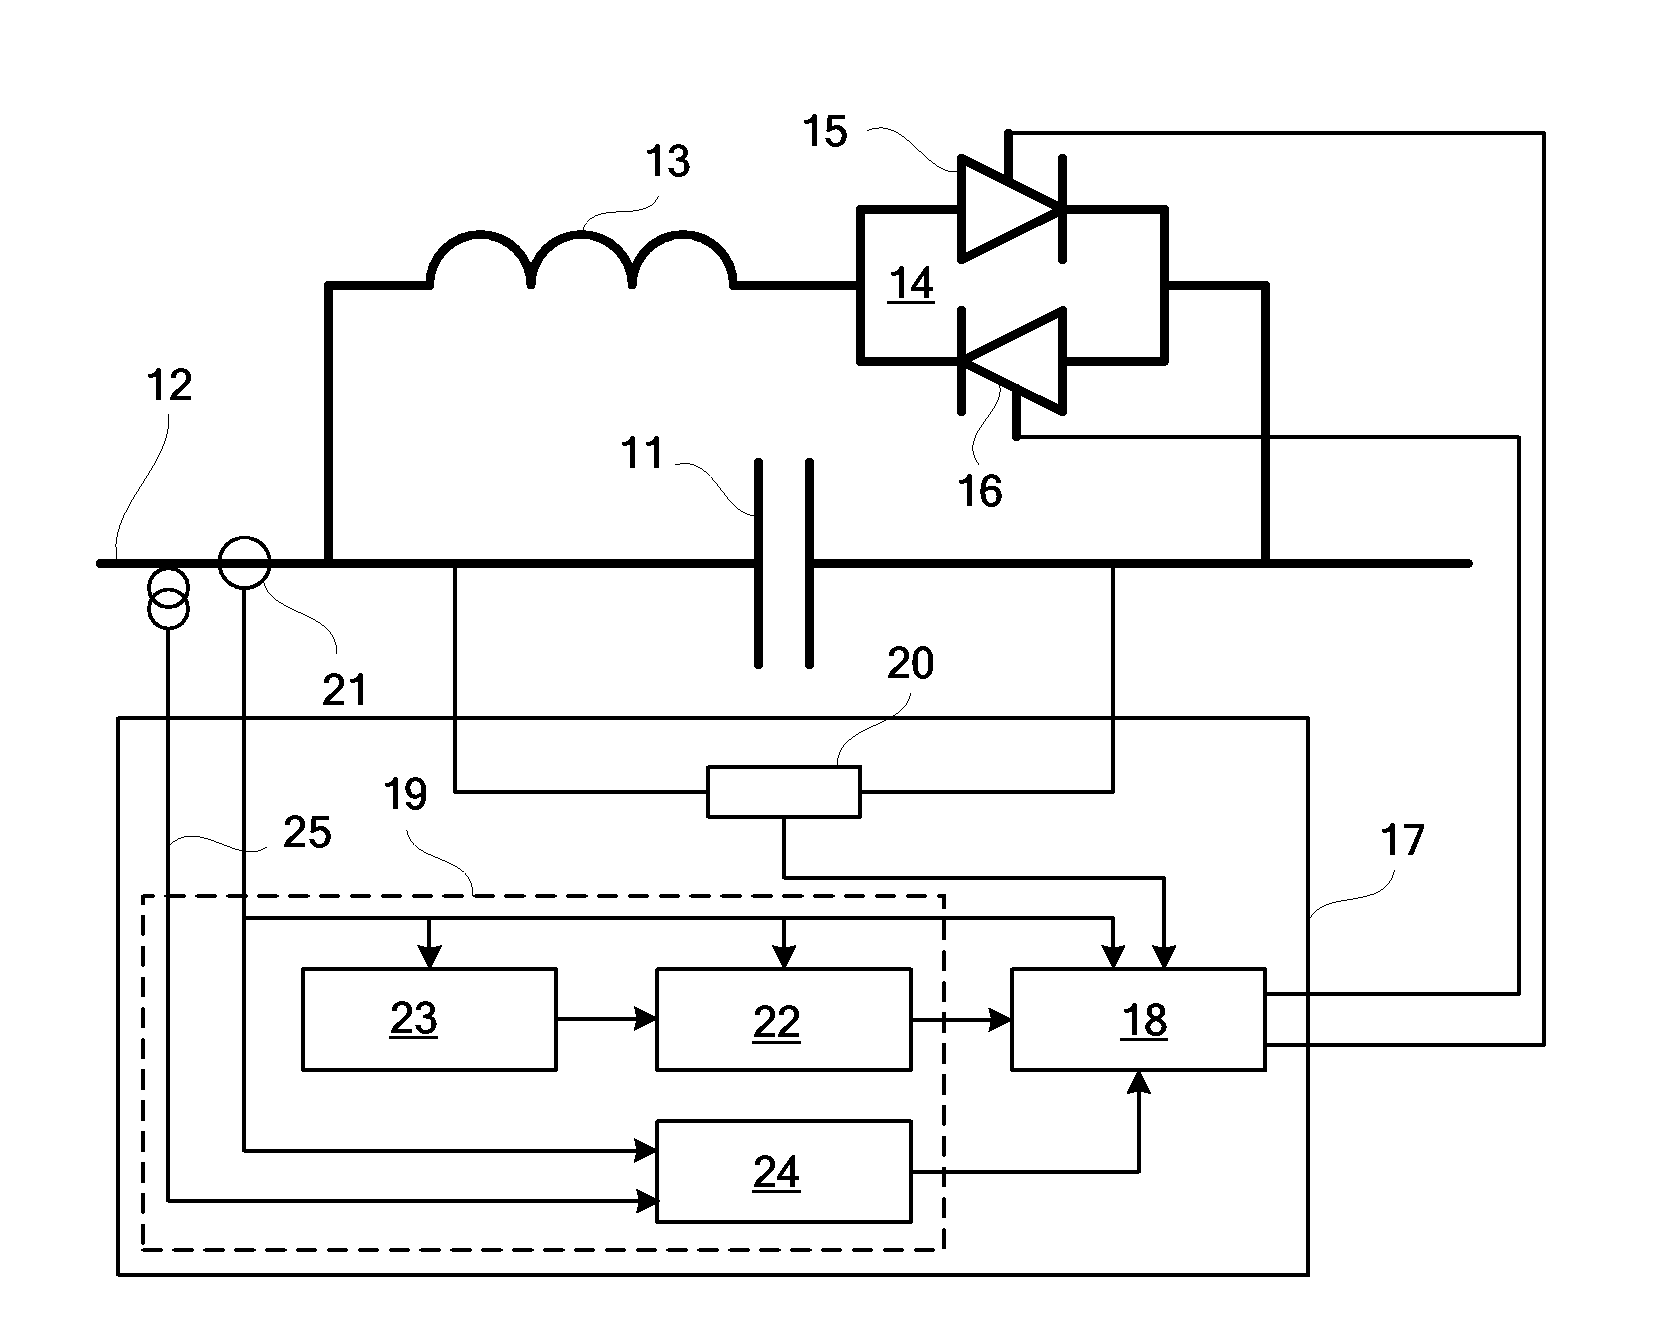 Thyristor controllied series capacitor adapted to damp sub synchronous resonances